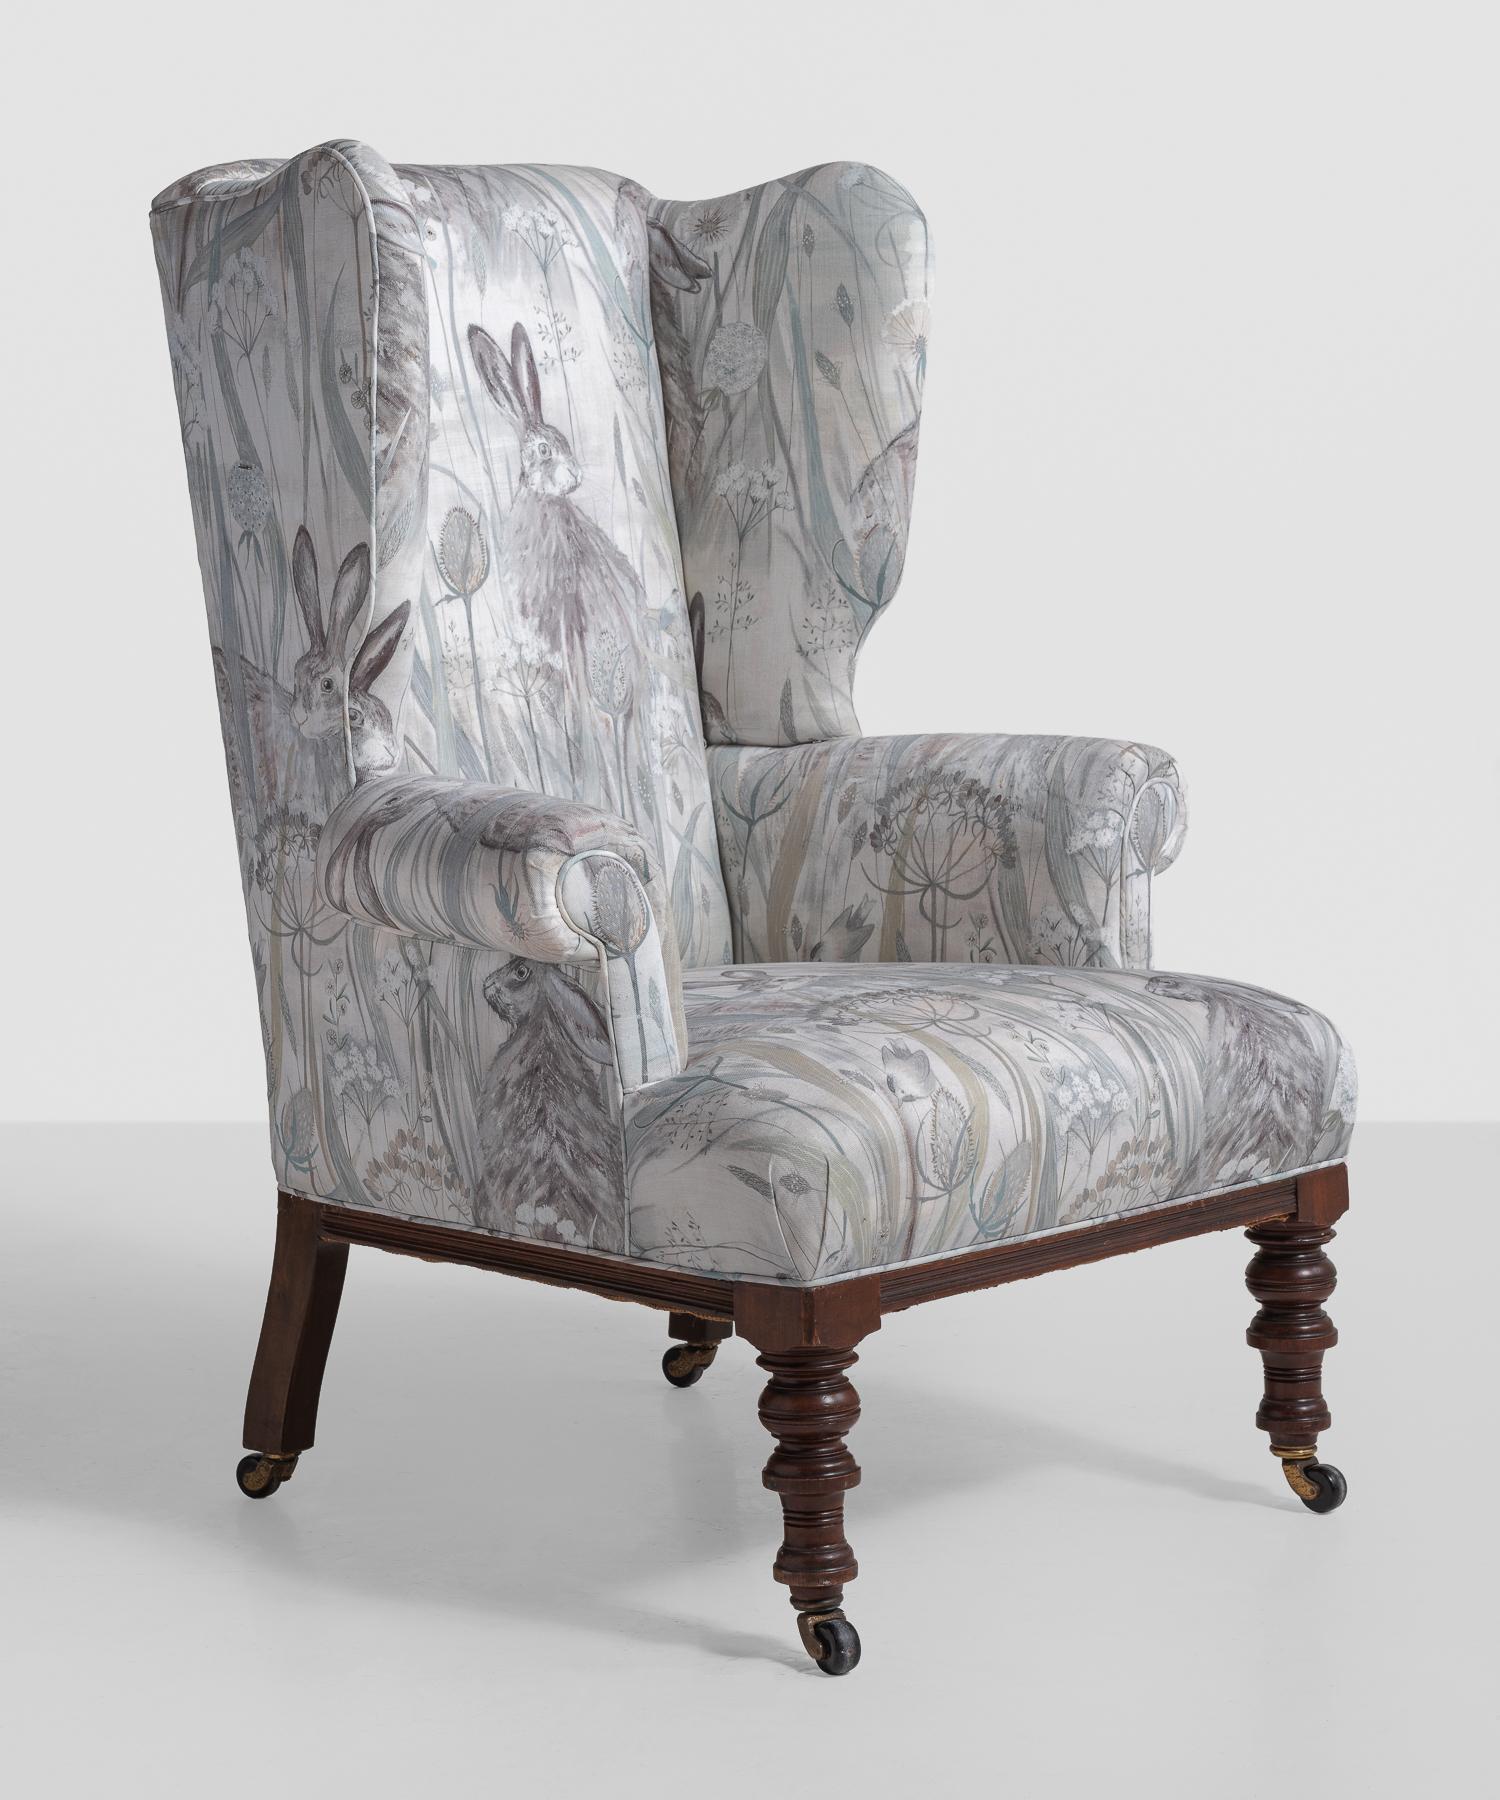 Victorian wingback chair, England, circa 1840.

Newly upholstered in Dune Hares fabric by Sanderson. Turned mahogany legs.

Measures: 28